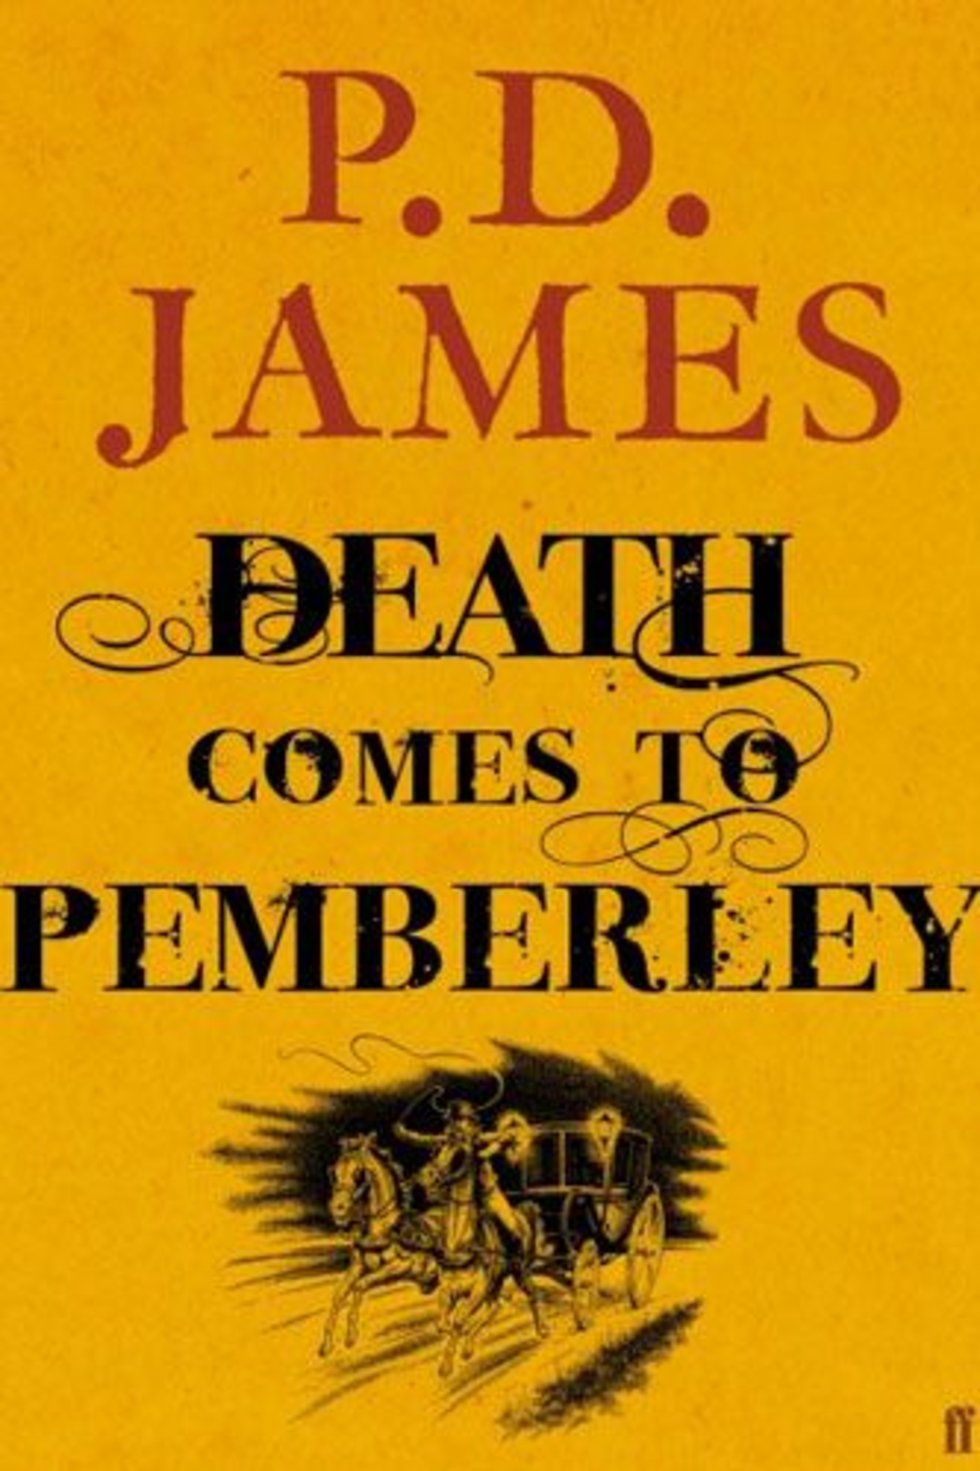 death comes to pemberley book review